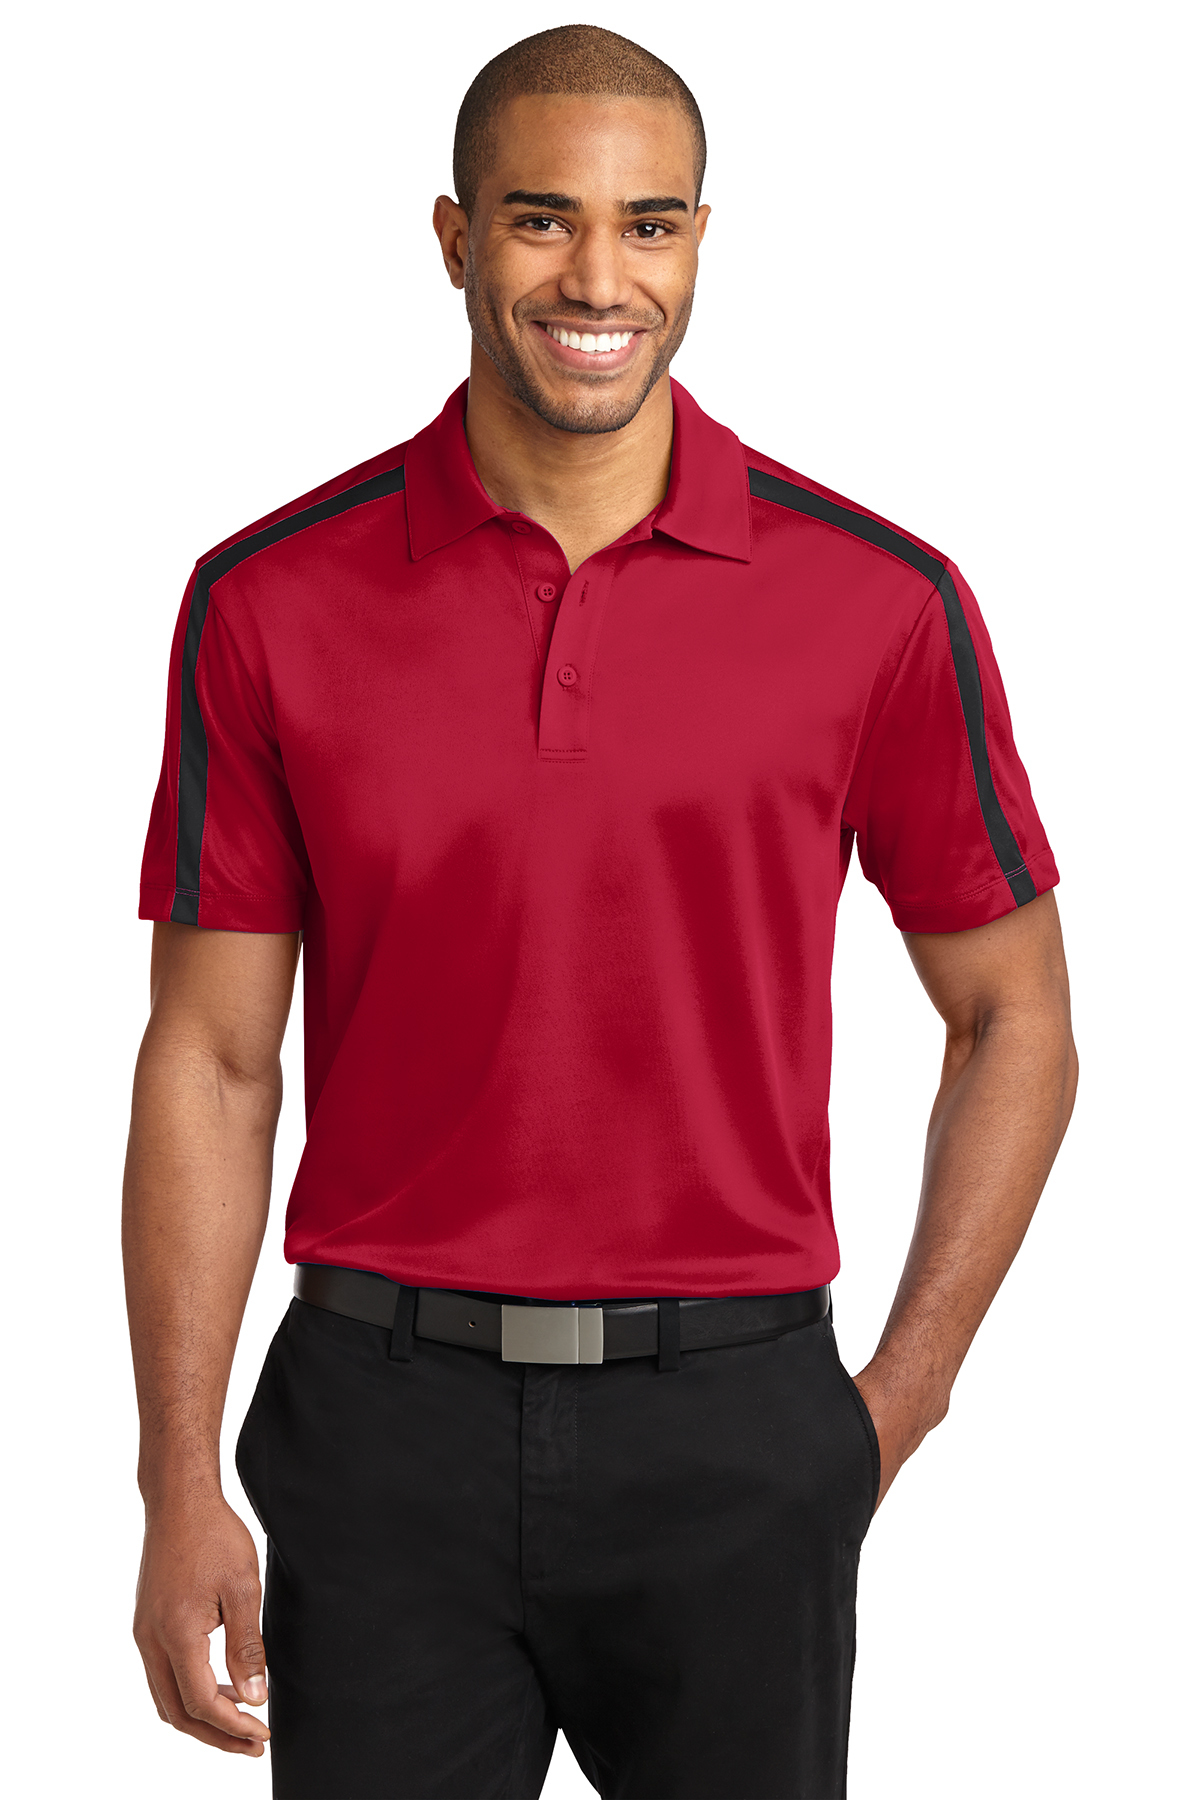 Port Authority K547 Silk Touch Performance Colorblock Stripe Polo